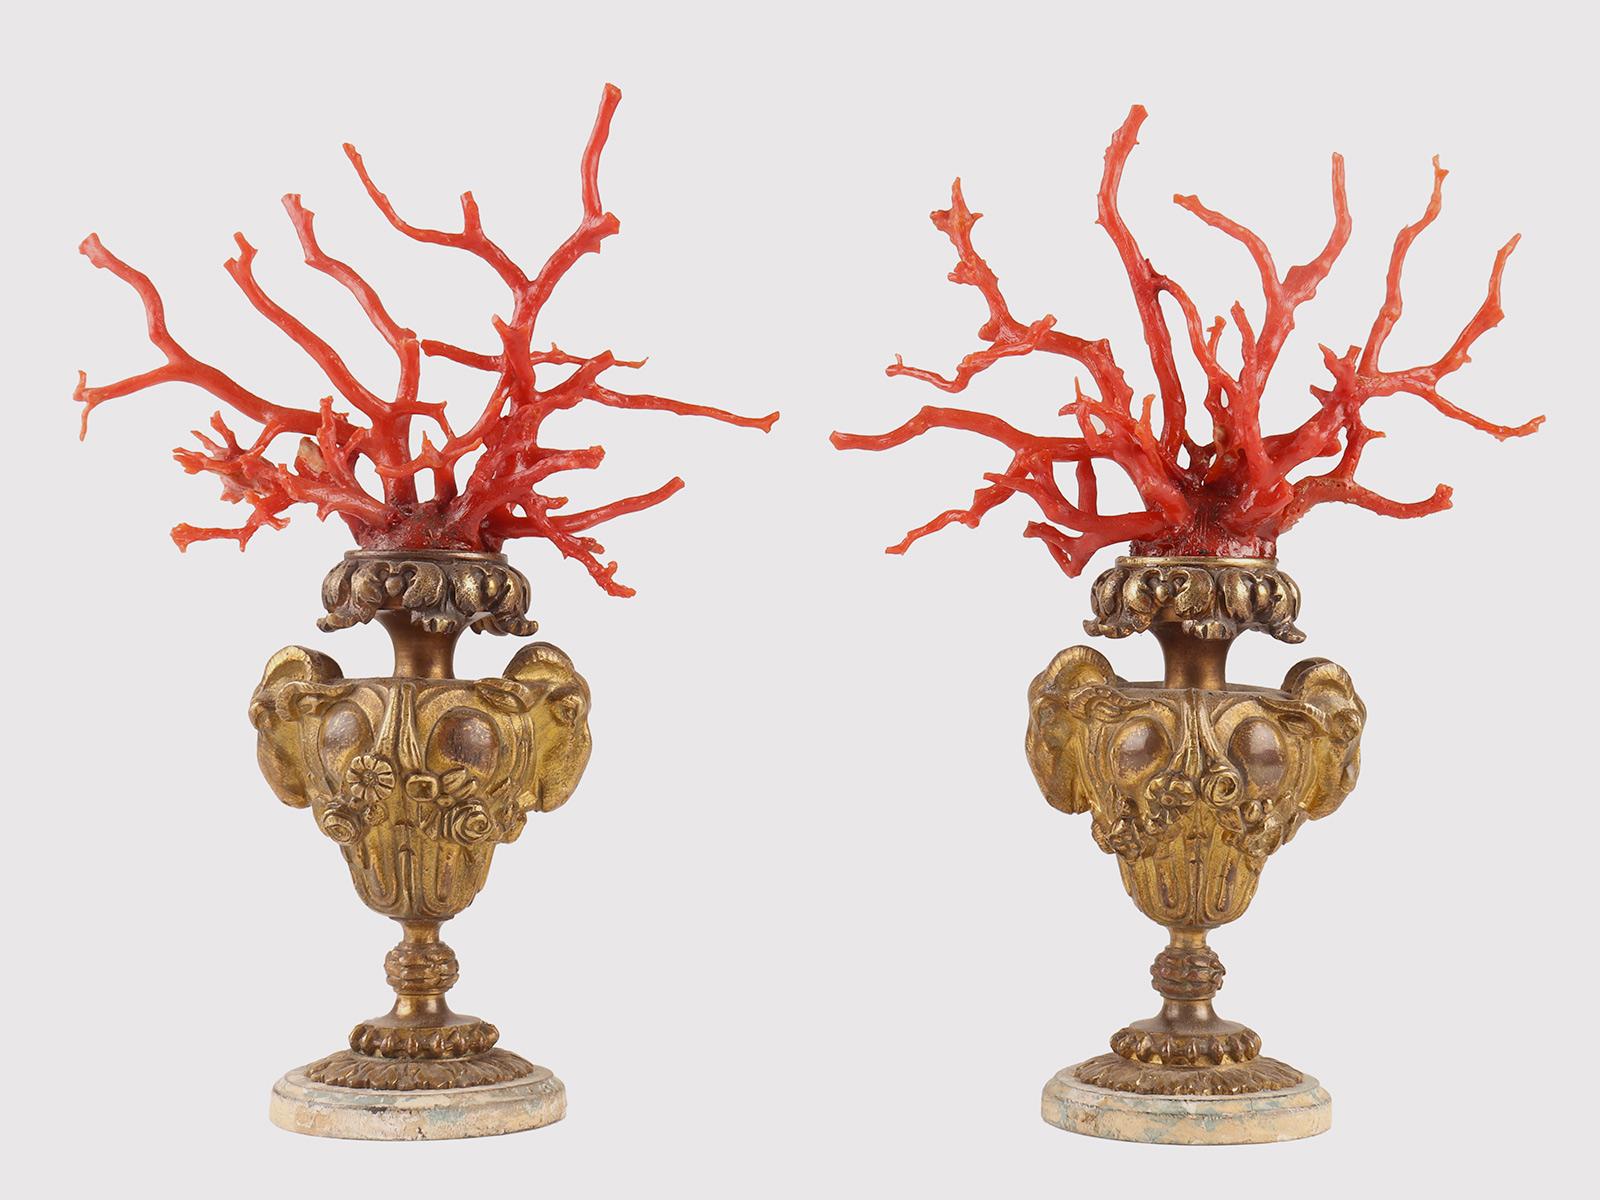 Pair of branches of Mediterranean red coral, 'Corallium Rubrum', mounted on a gilt bronze base. The realization of the bases sees different techniques: the lost wax casting, the hammer and the chisel. The circular base, in painted wood, holds the